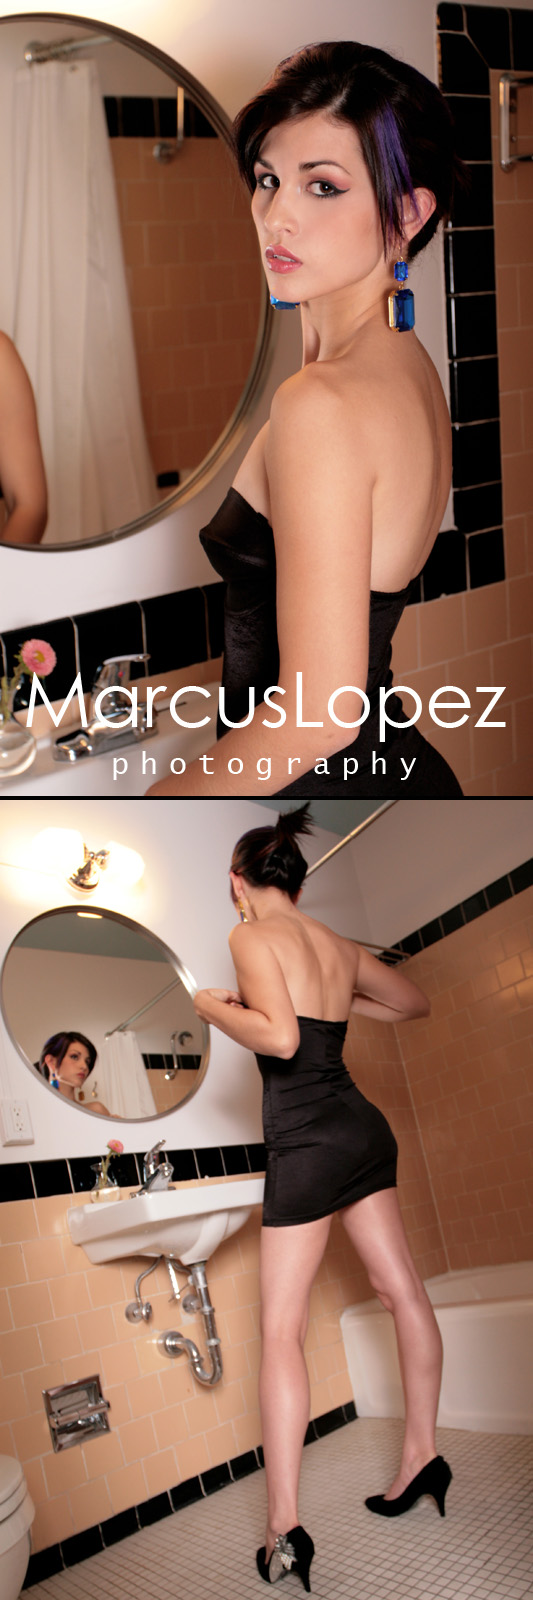 Male and Female model photo shoot of MarcusLopez photography and Havilah_B in Dallas, makeup by Hava Makeup Styling